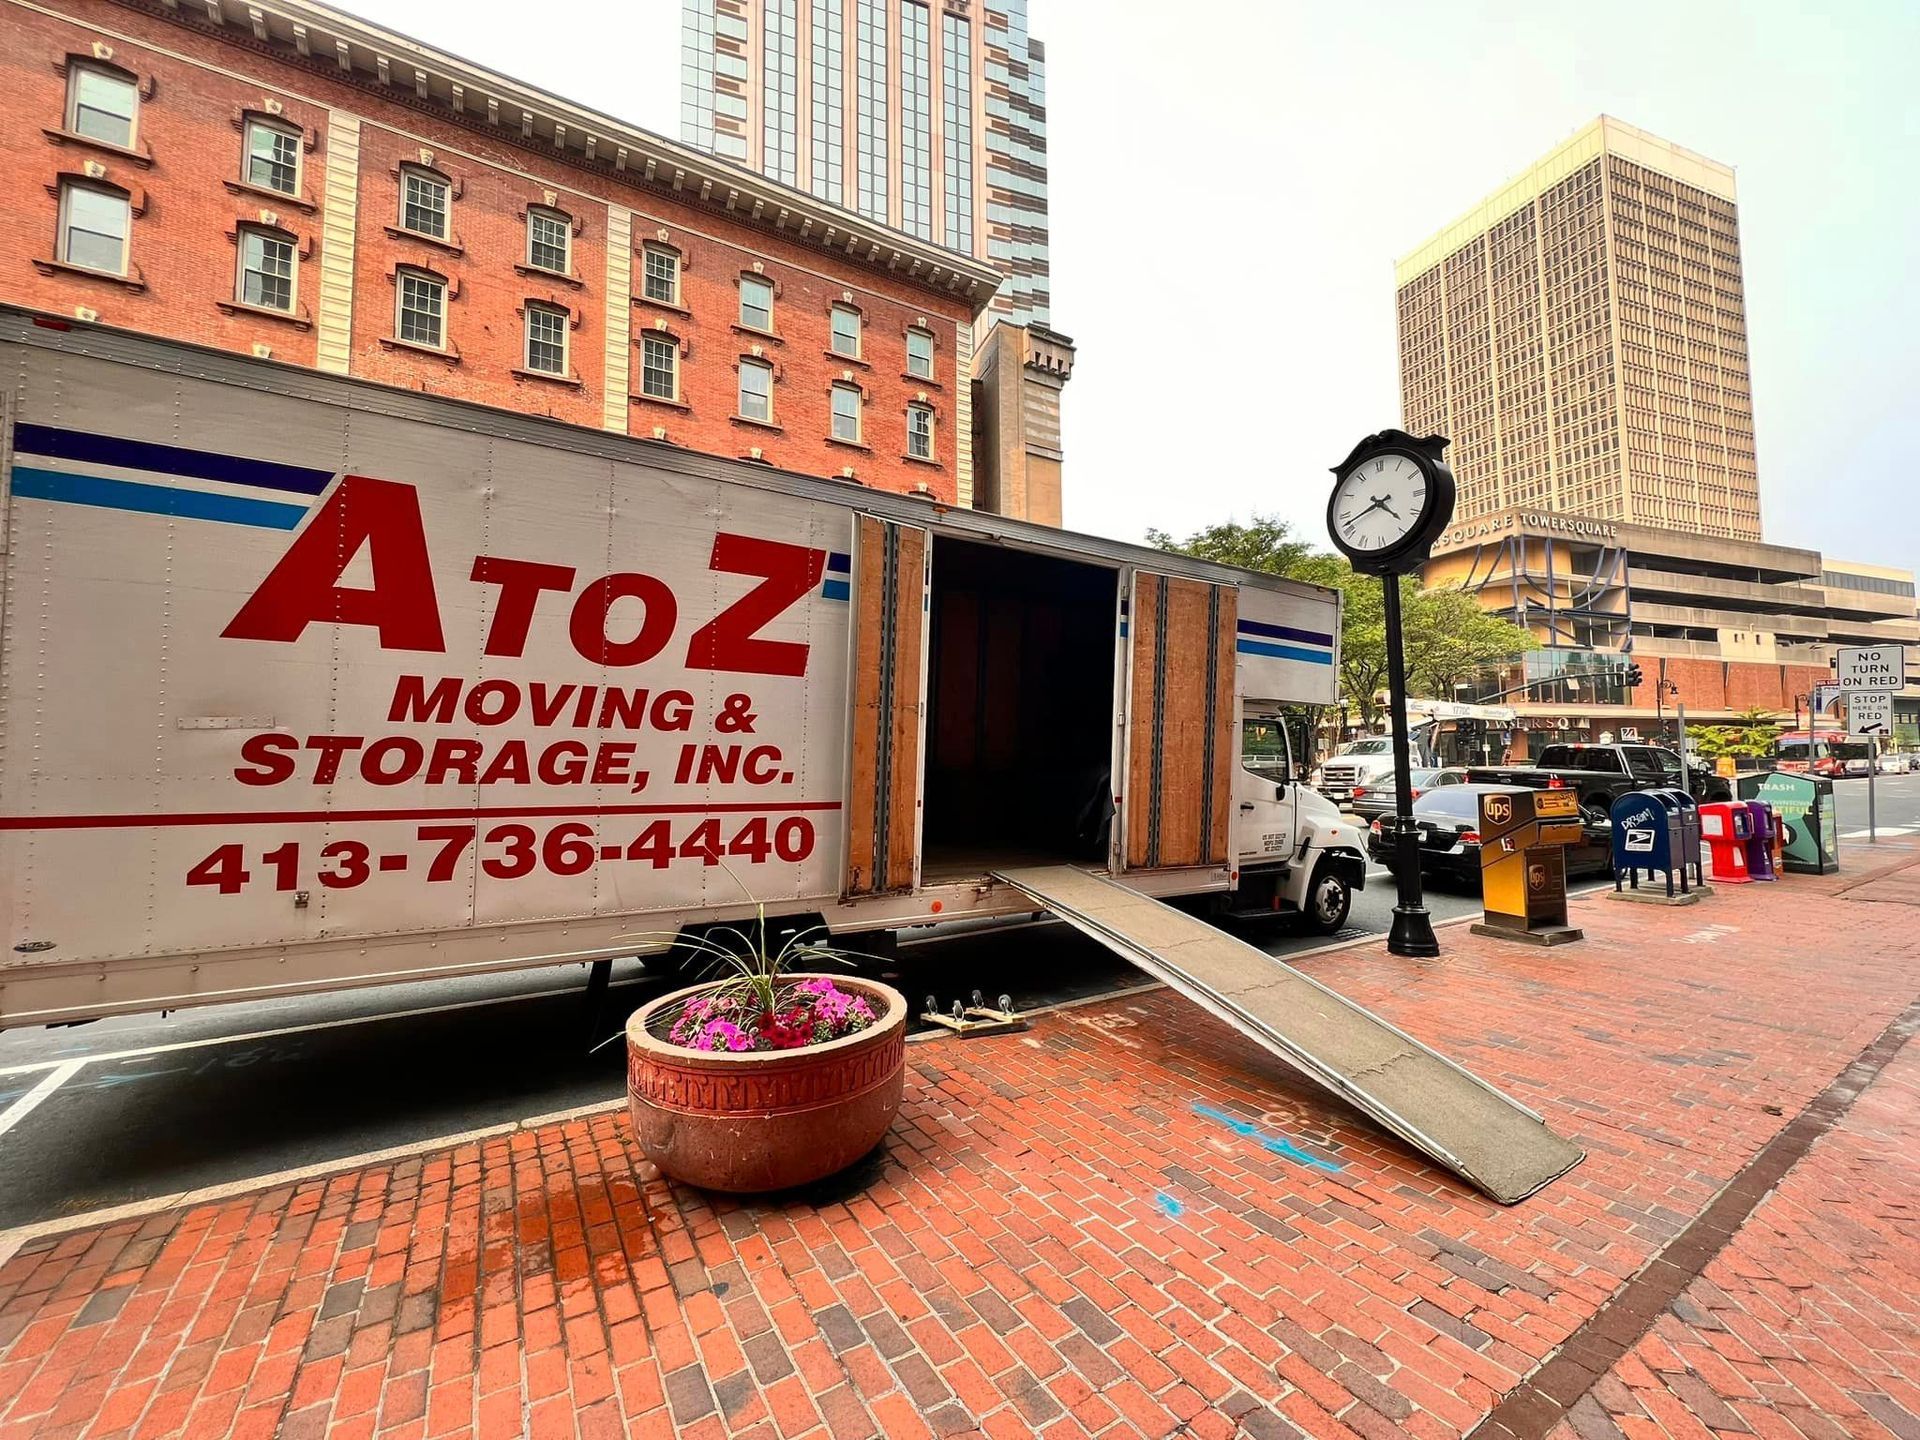 Moving and Storage Truck on Brick Sidewalk | West Springfield, MA | A to Z Moving & Storage